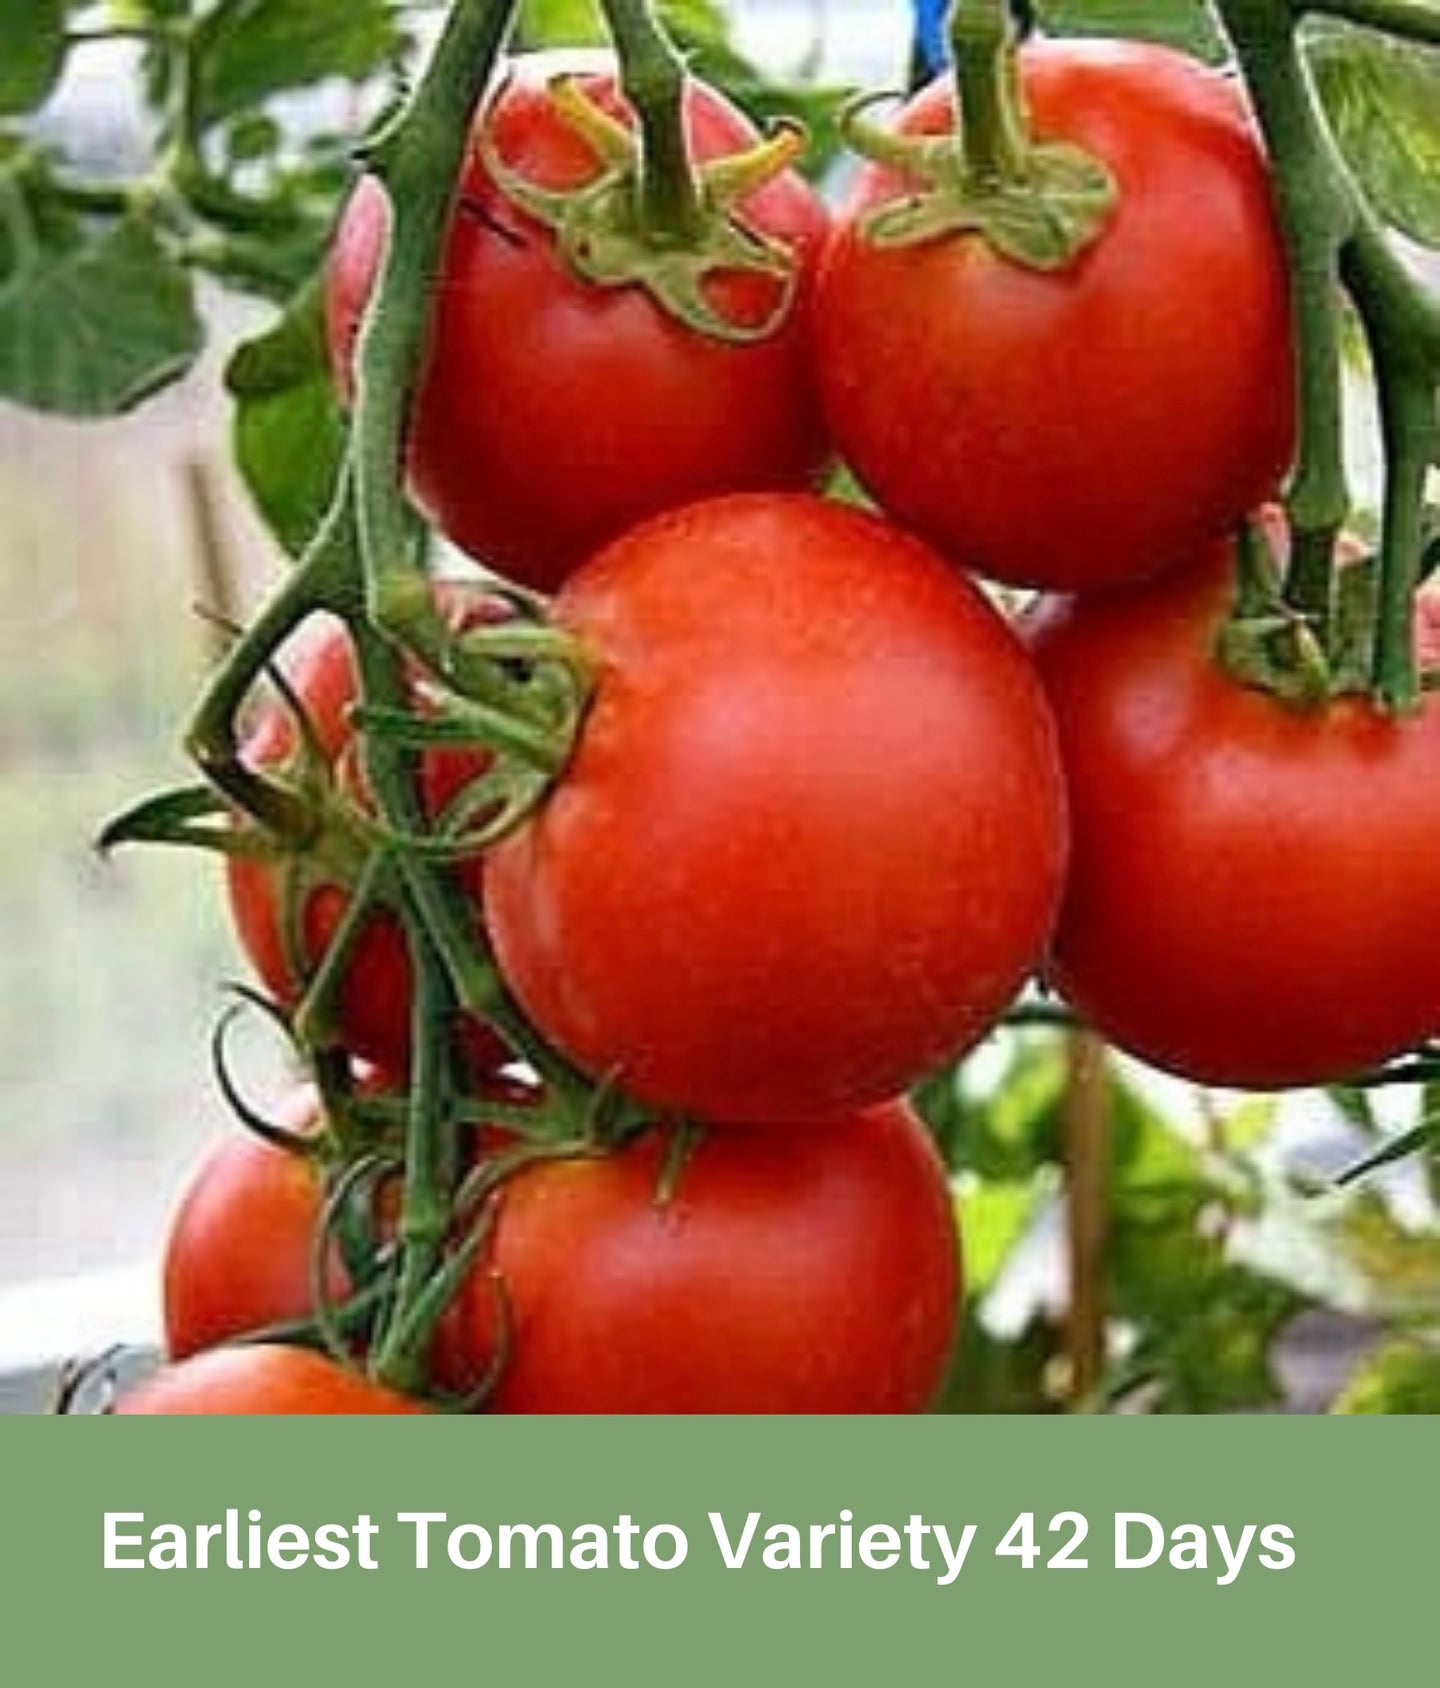 Heirloom Tomato Seeds Earliest Tomato Variety 42 Days, First Variety to Yield Tomatoes 20 Seeds